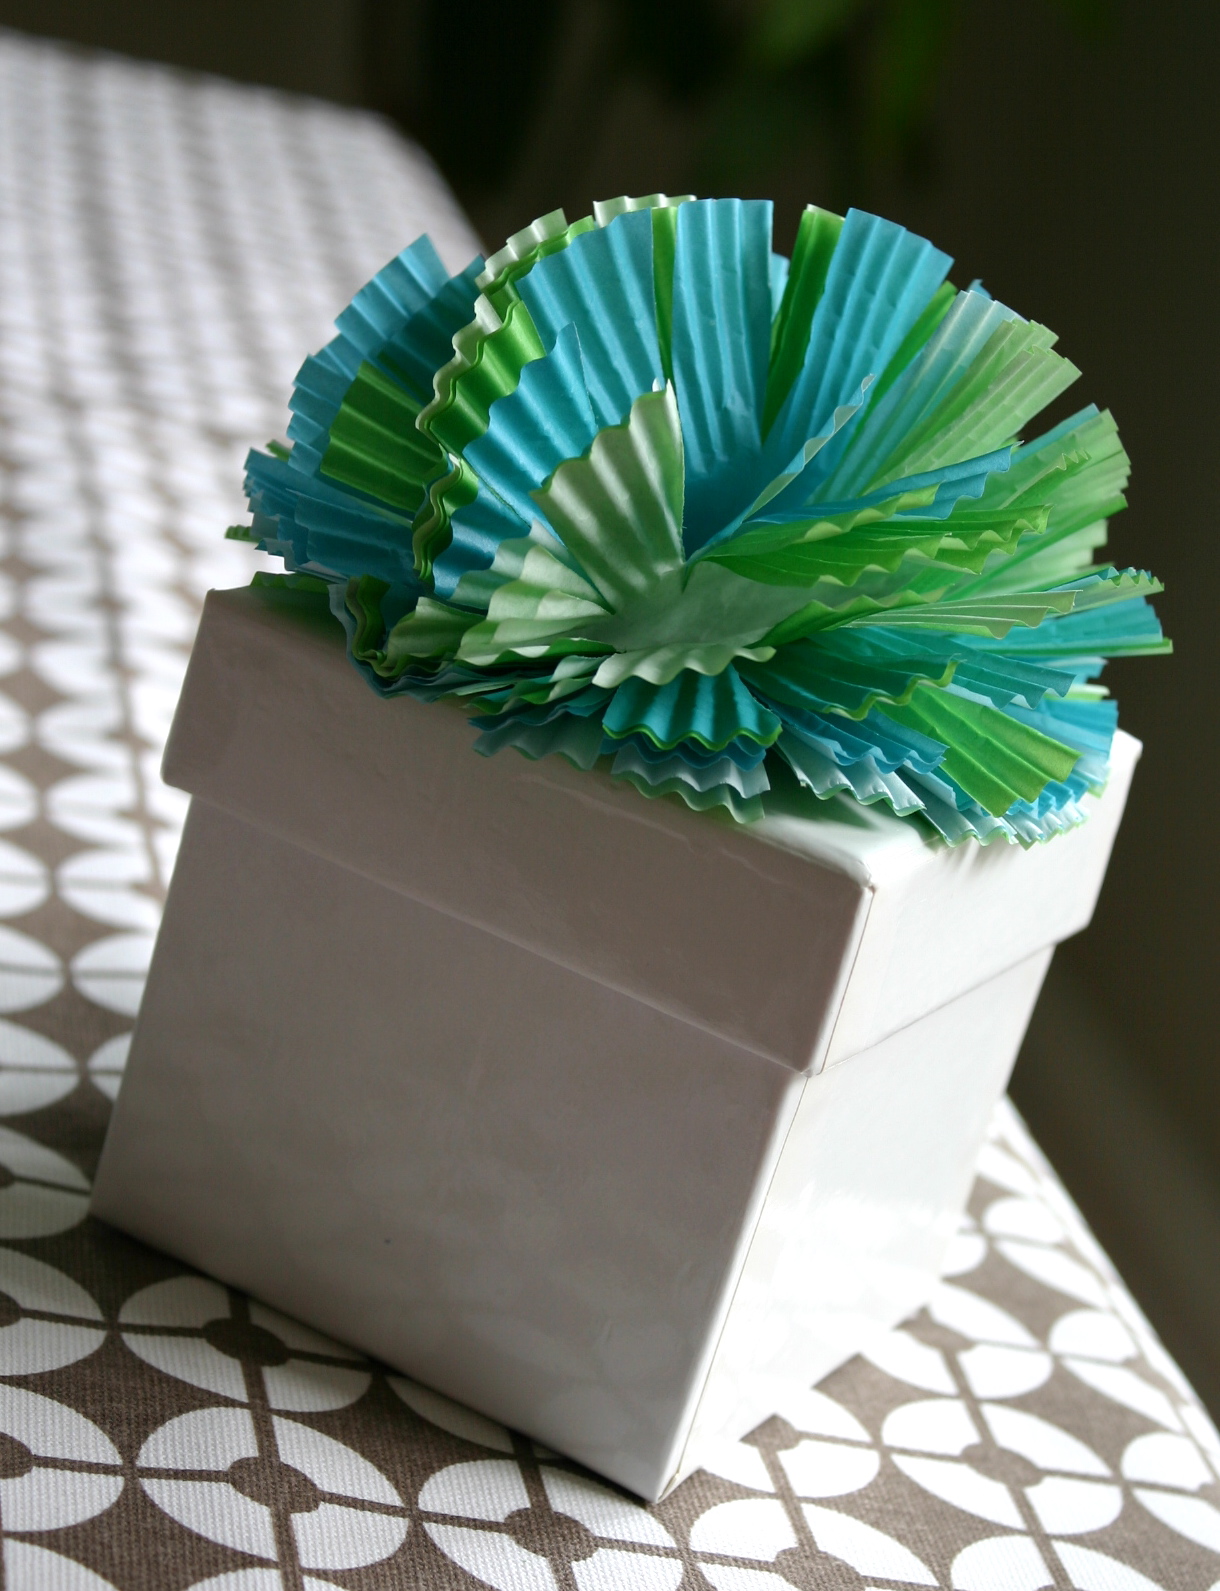 Cupcake Liner Gift Toppers